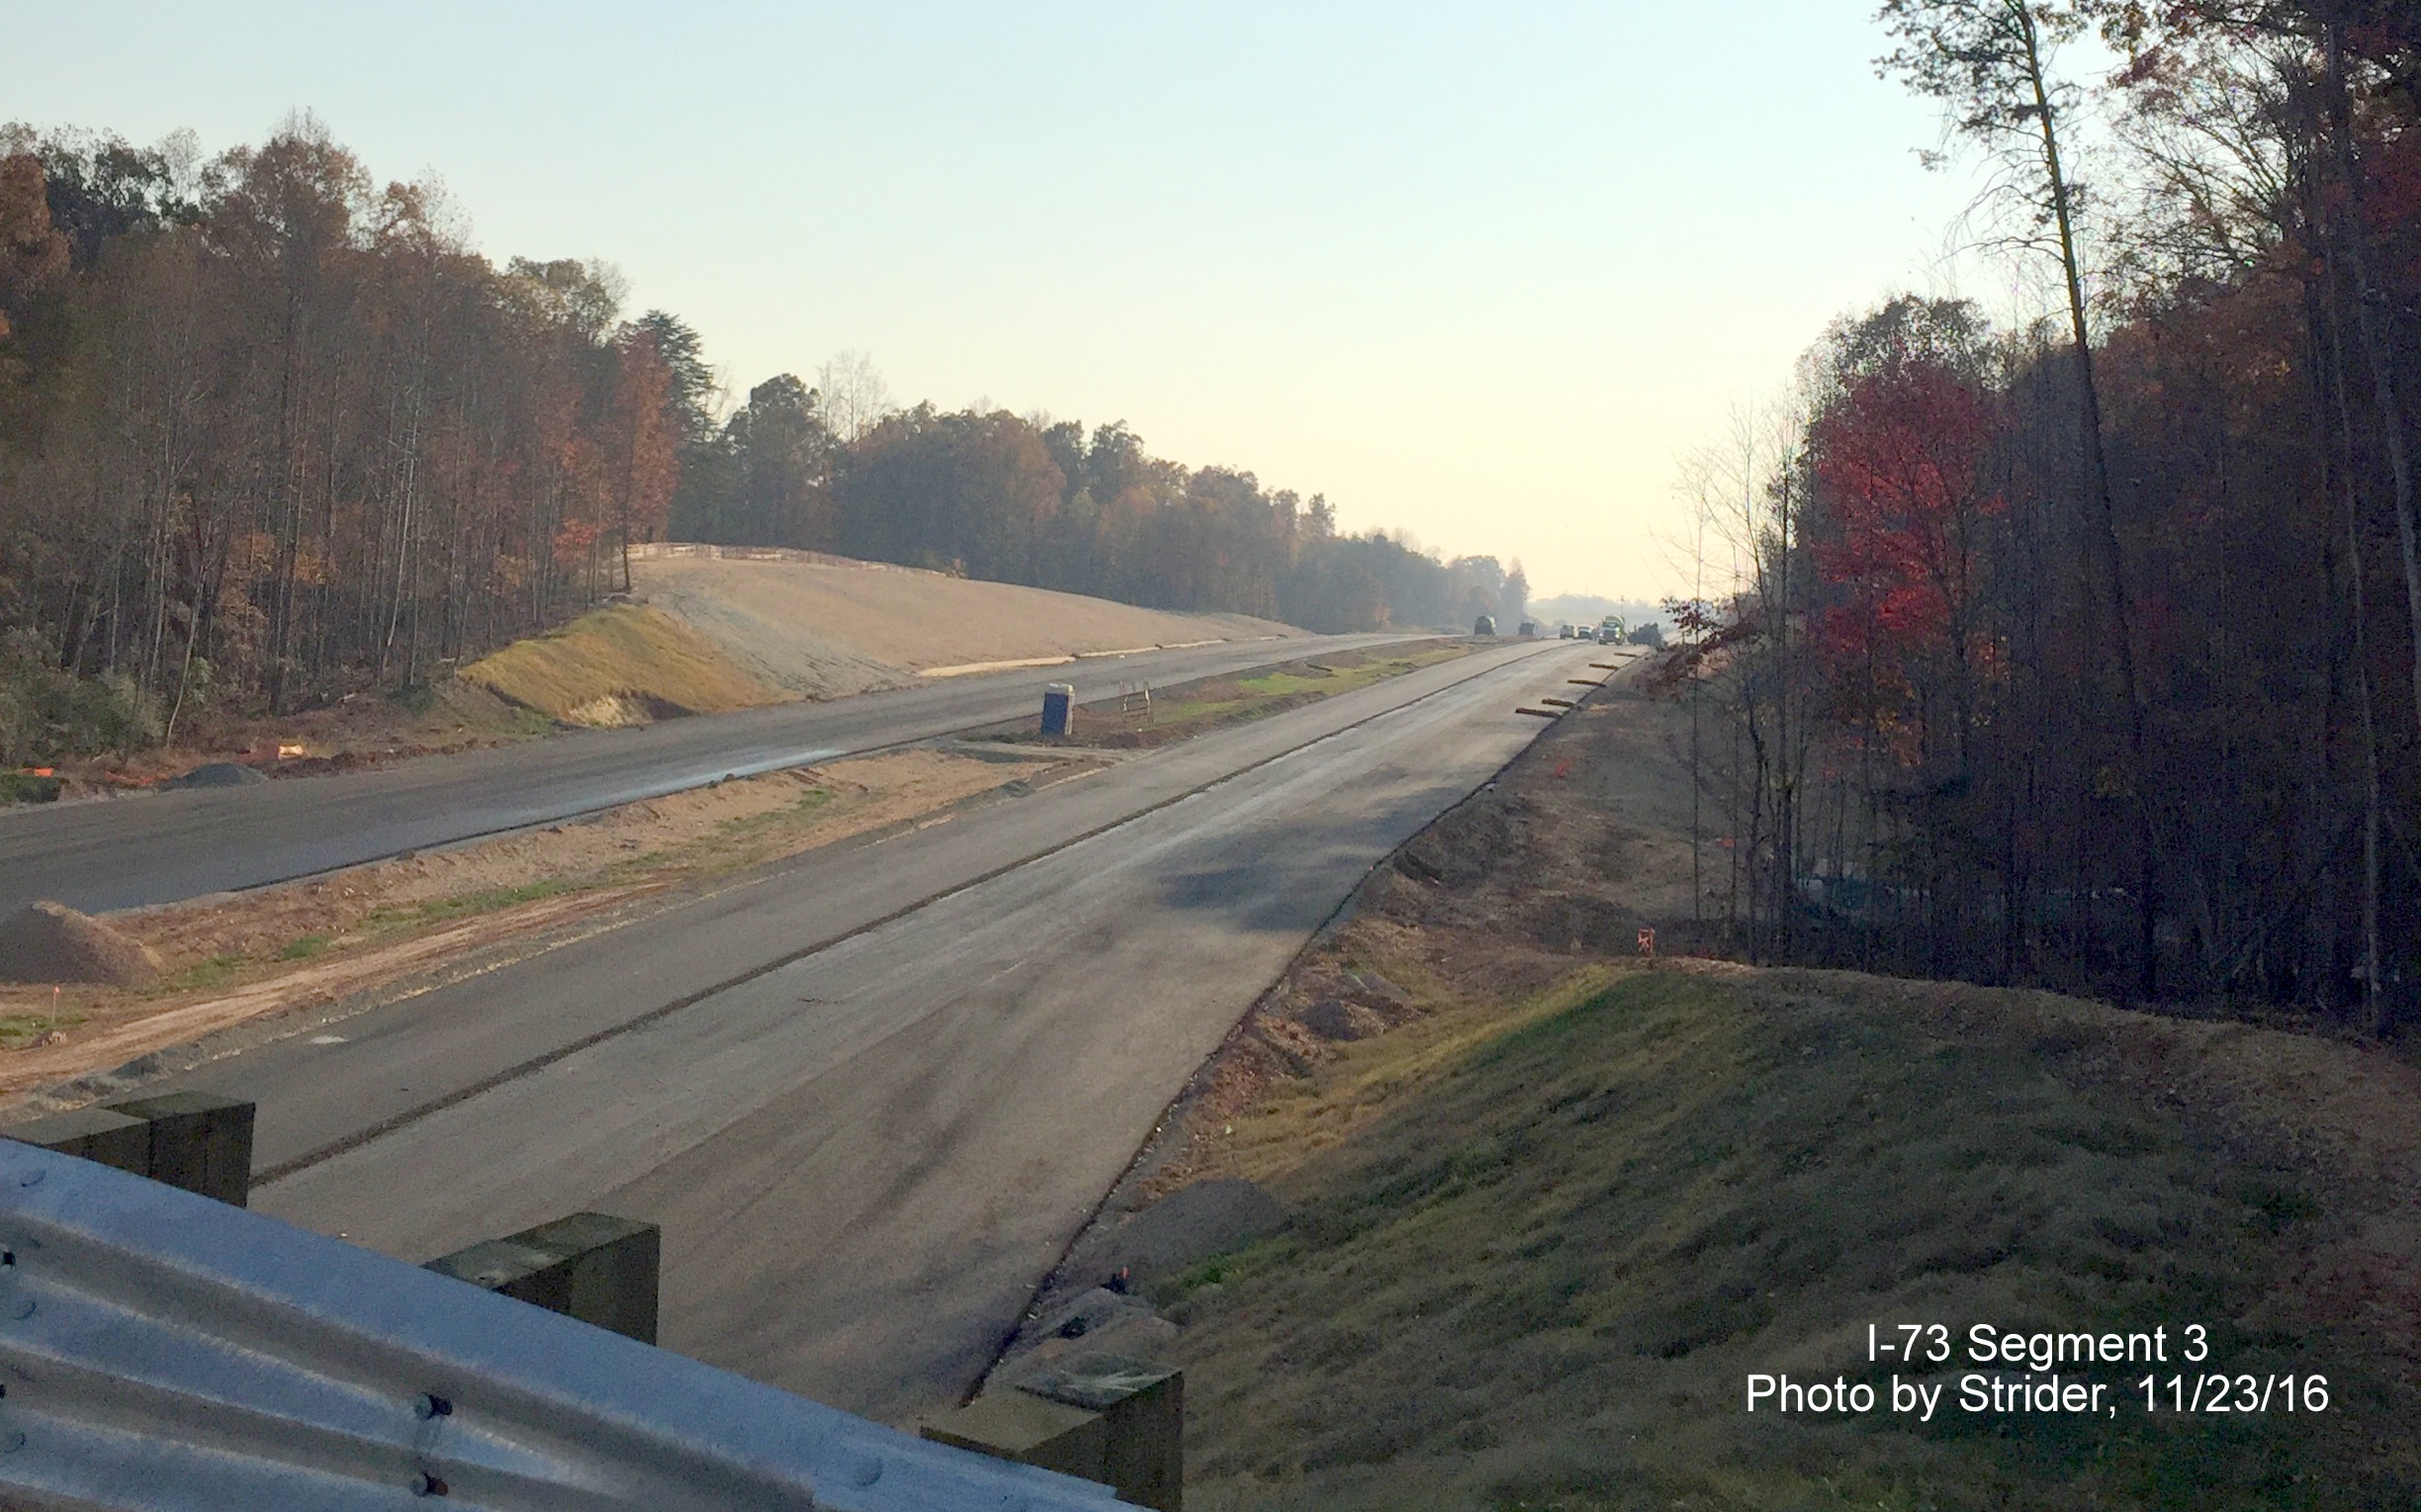 Image of view from Deboe Road looking south on toward NC 150 showing progress paving future I-73 lanes, from Strider